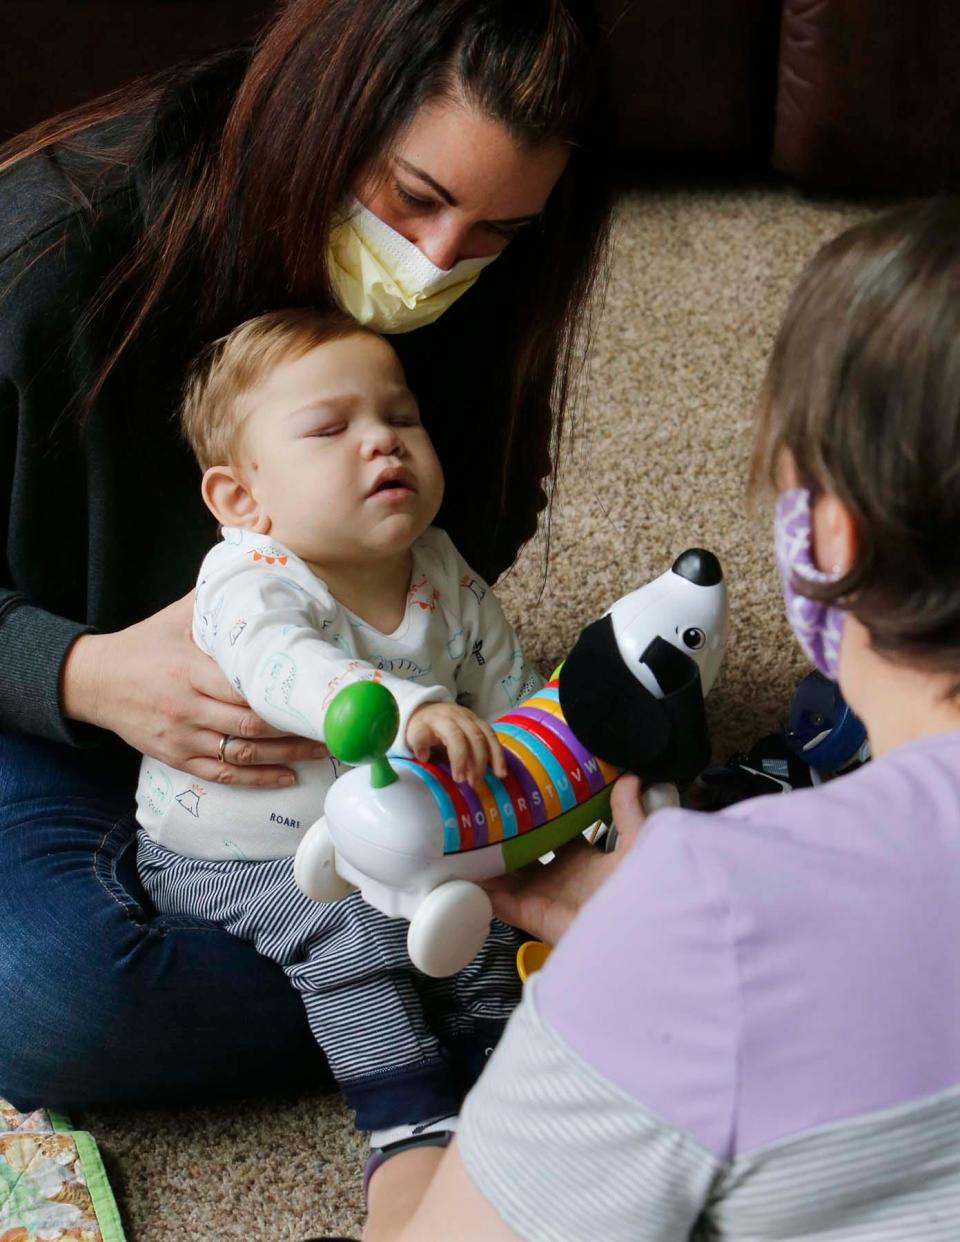 David Detwiler, 19 months, sits on the lap of his mother, Carlla Detwiler, as he reaches out to a toy dog during a session with physical therapist Jenn Masser on Nov. 11 at the Detwiler home in Massillon.